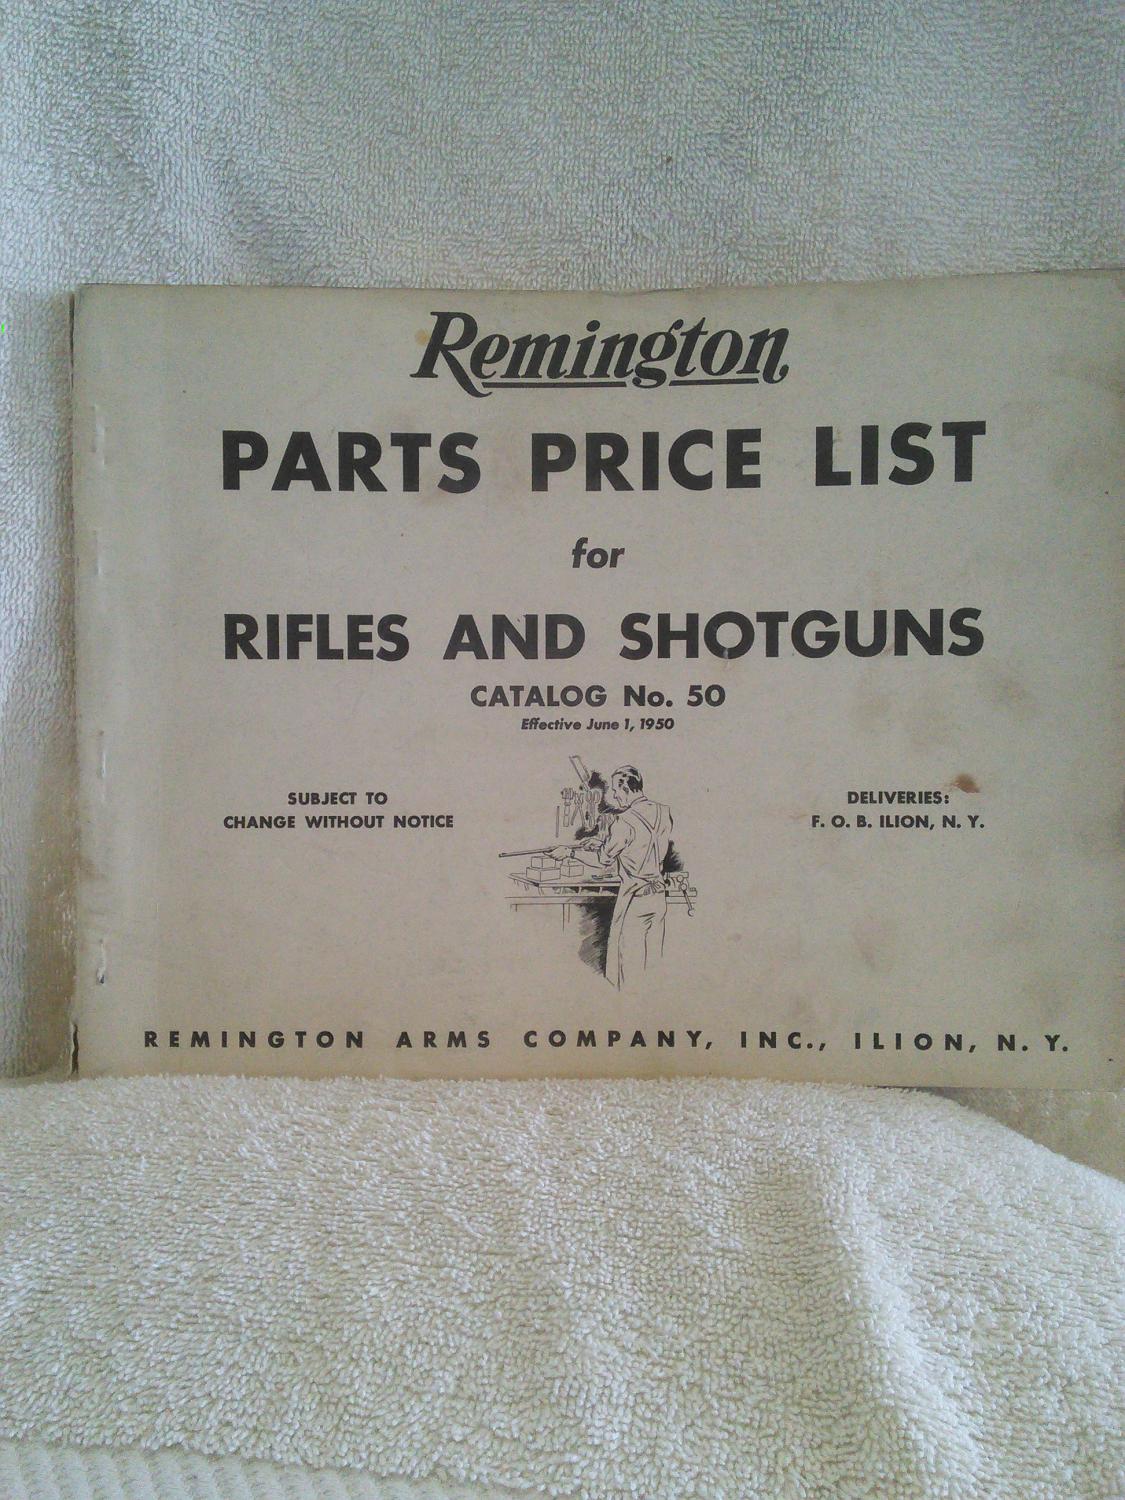 Details about   Remington Parts Price List For Rifles And Shotguns Catalog # 50 1950 Advertising 